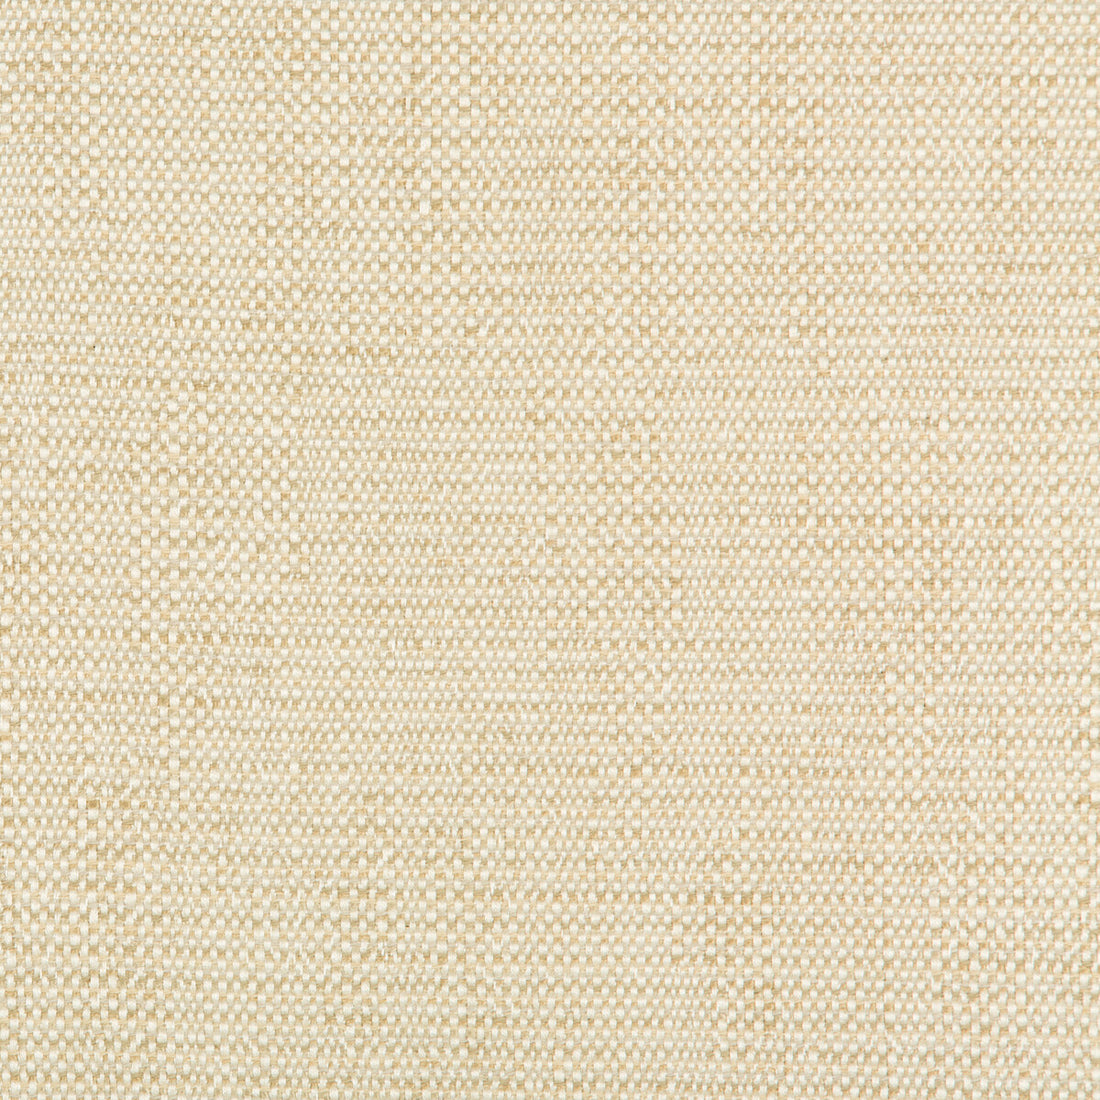 Kravet Contract fabric in 35132-116 color - pattern 35132.116.0 - by Kravet Contract in the Incase Crypton Gis collection